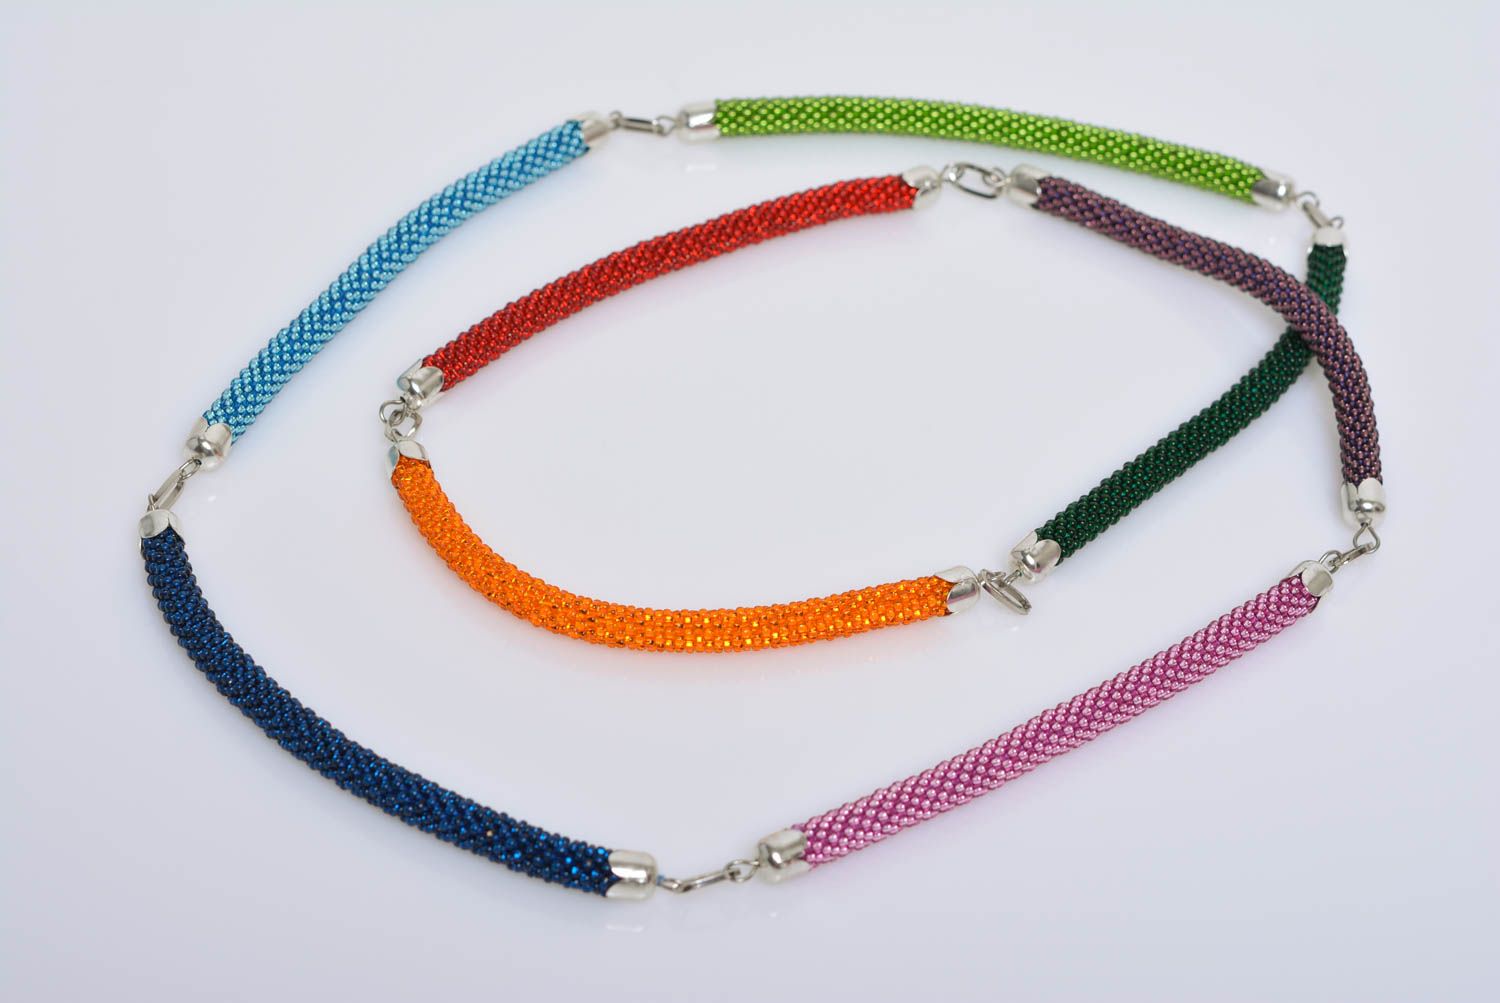 Handmade designer long bead woven cord necklace with bright colorful elements photo 1